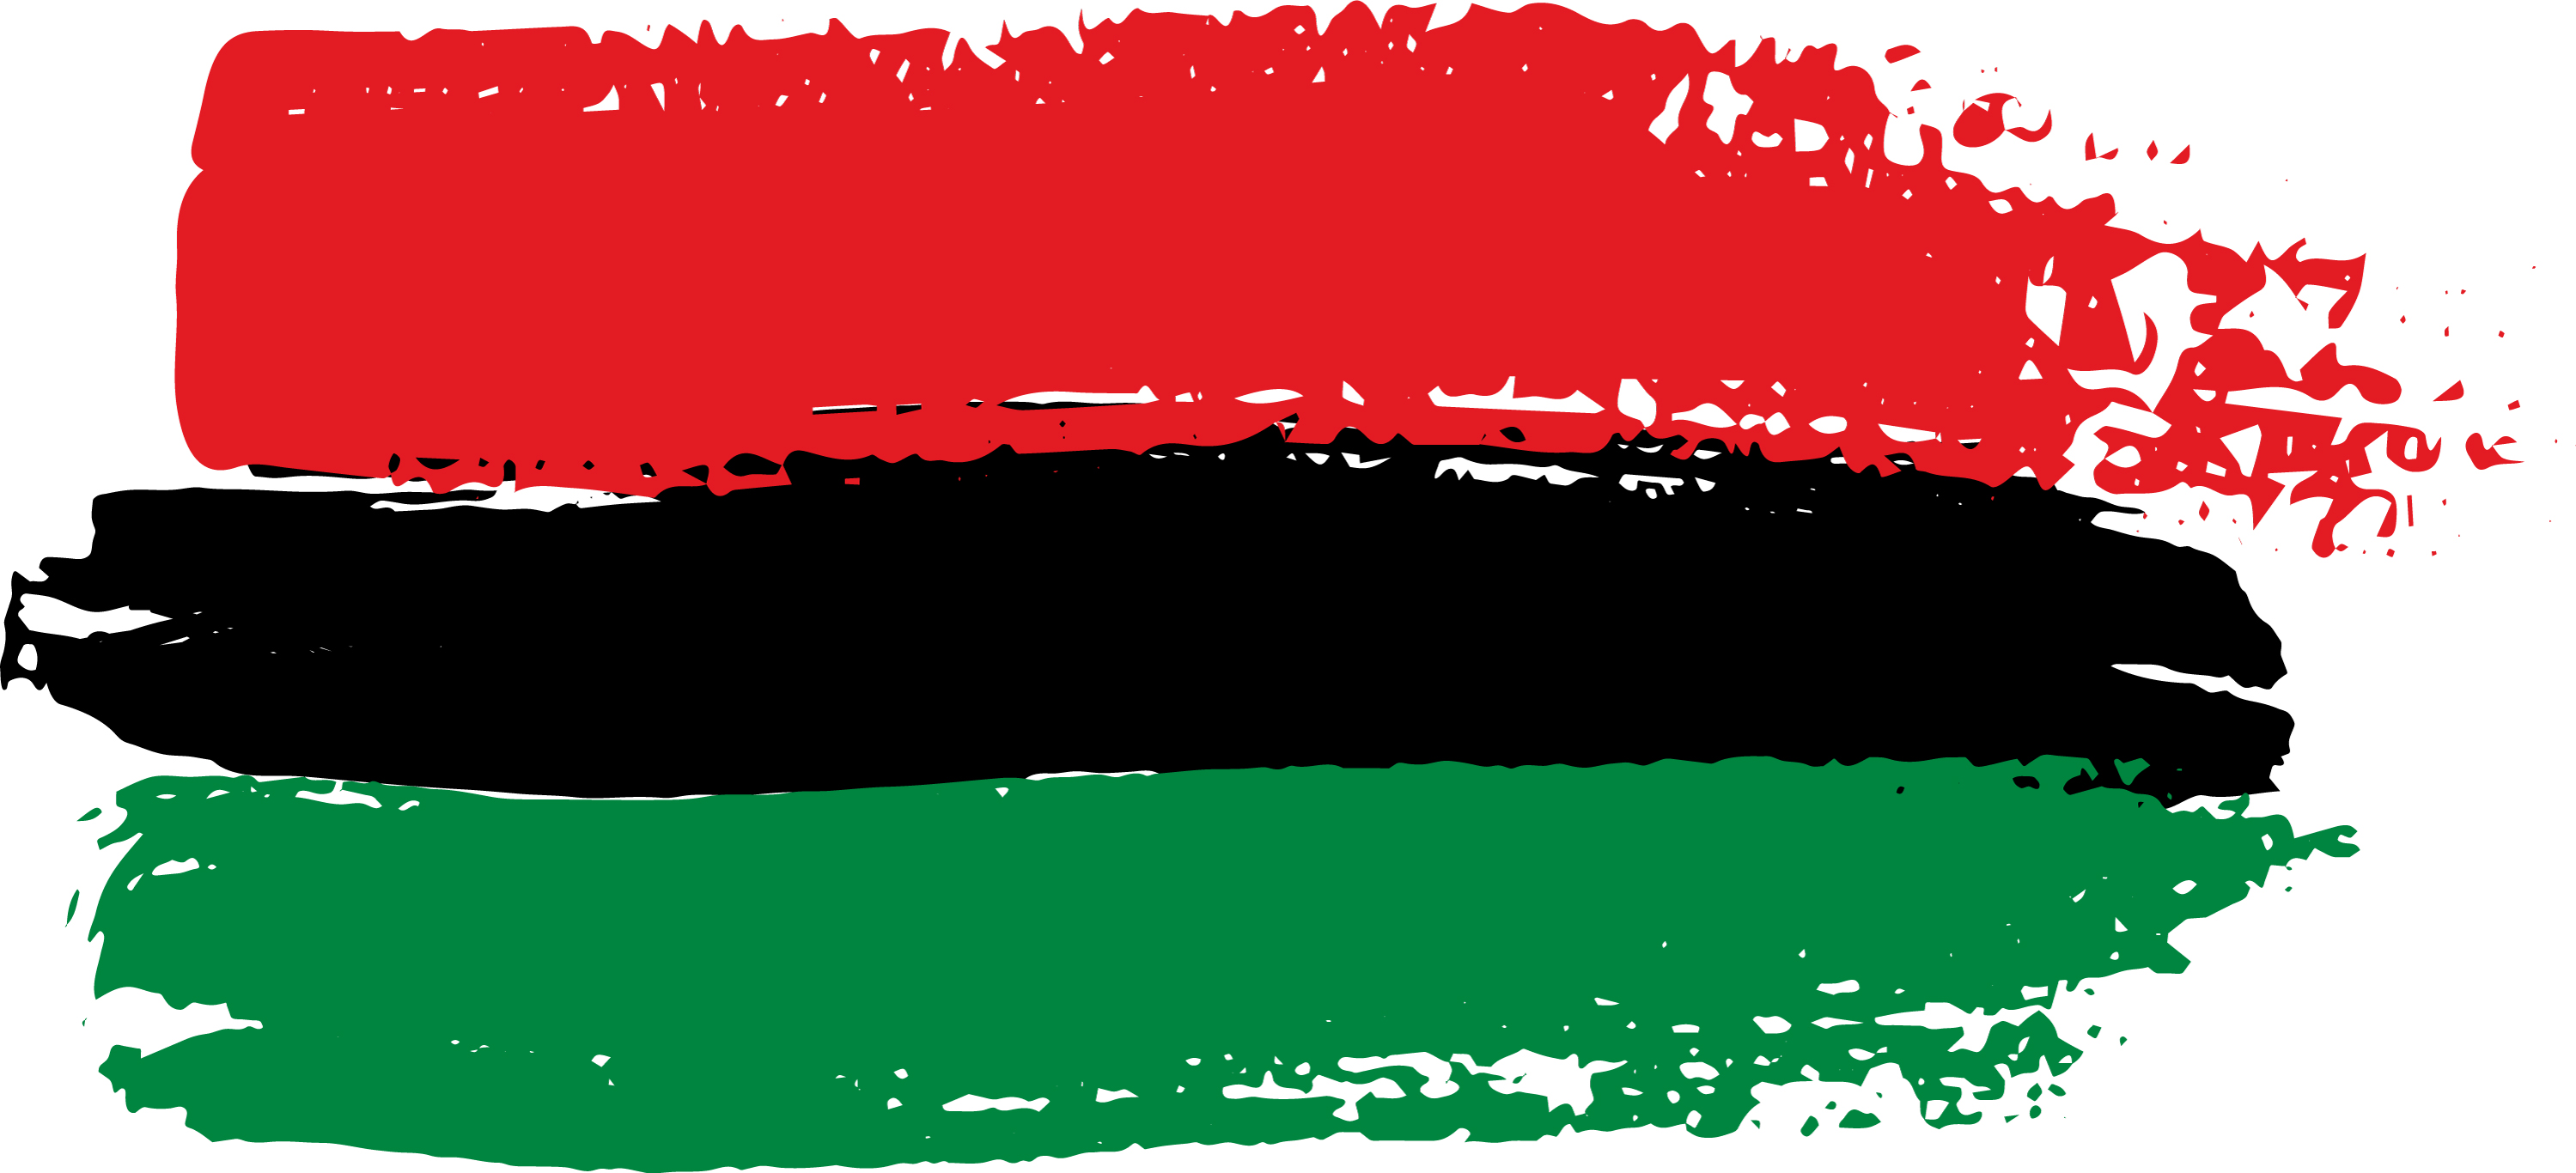 red green and black flag